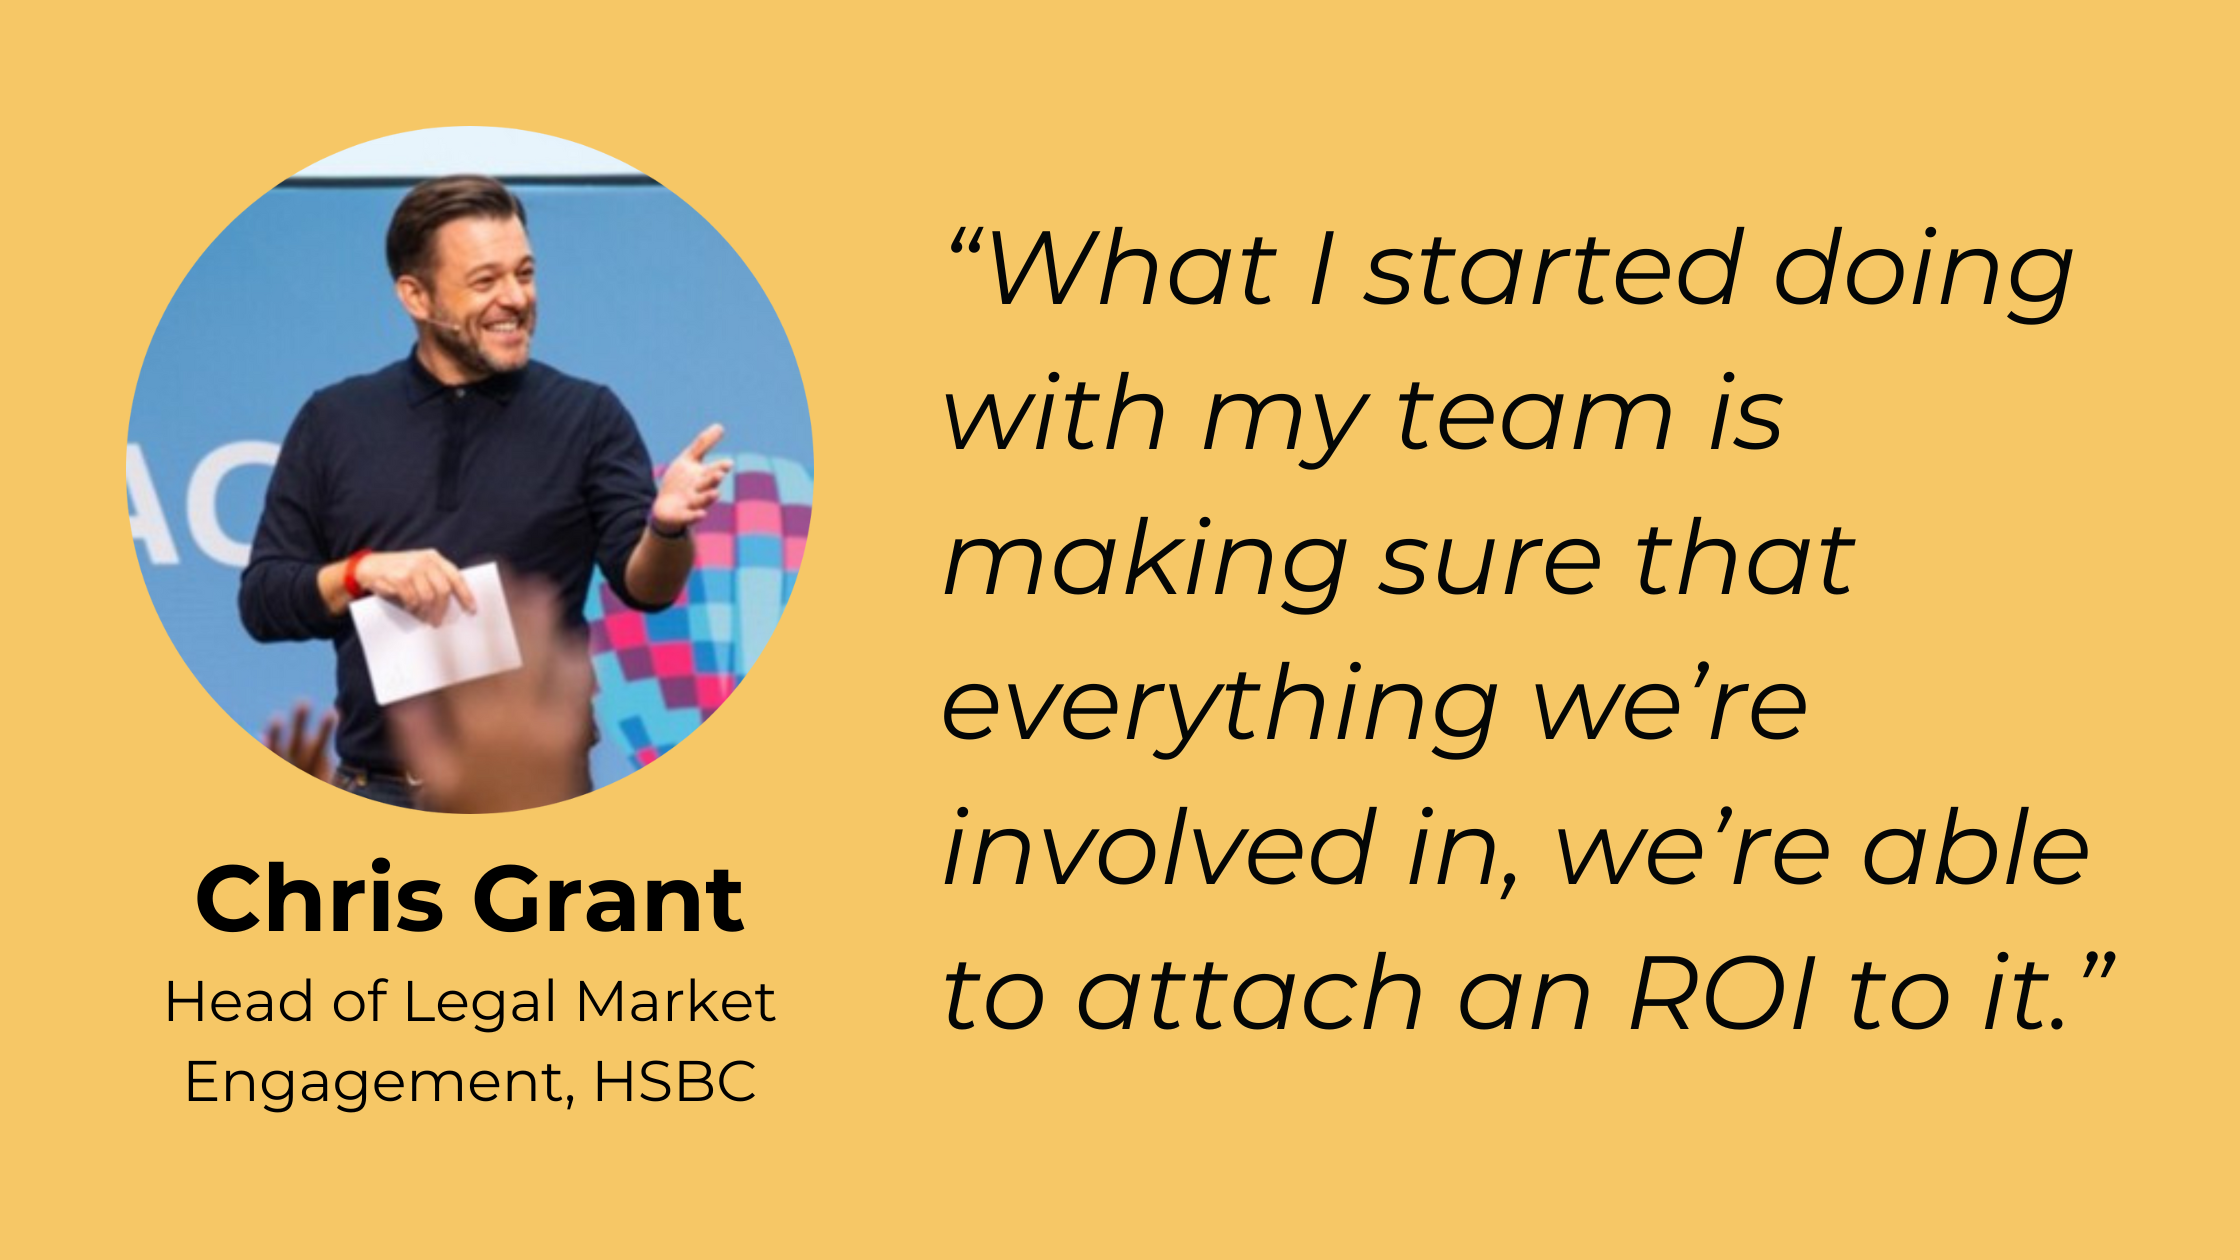 What Is the ROI of Legal Innovation? A Conversation With Chris Grant, Head of Legal Innovation, HSBC